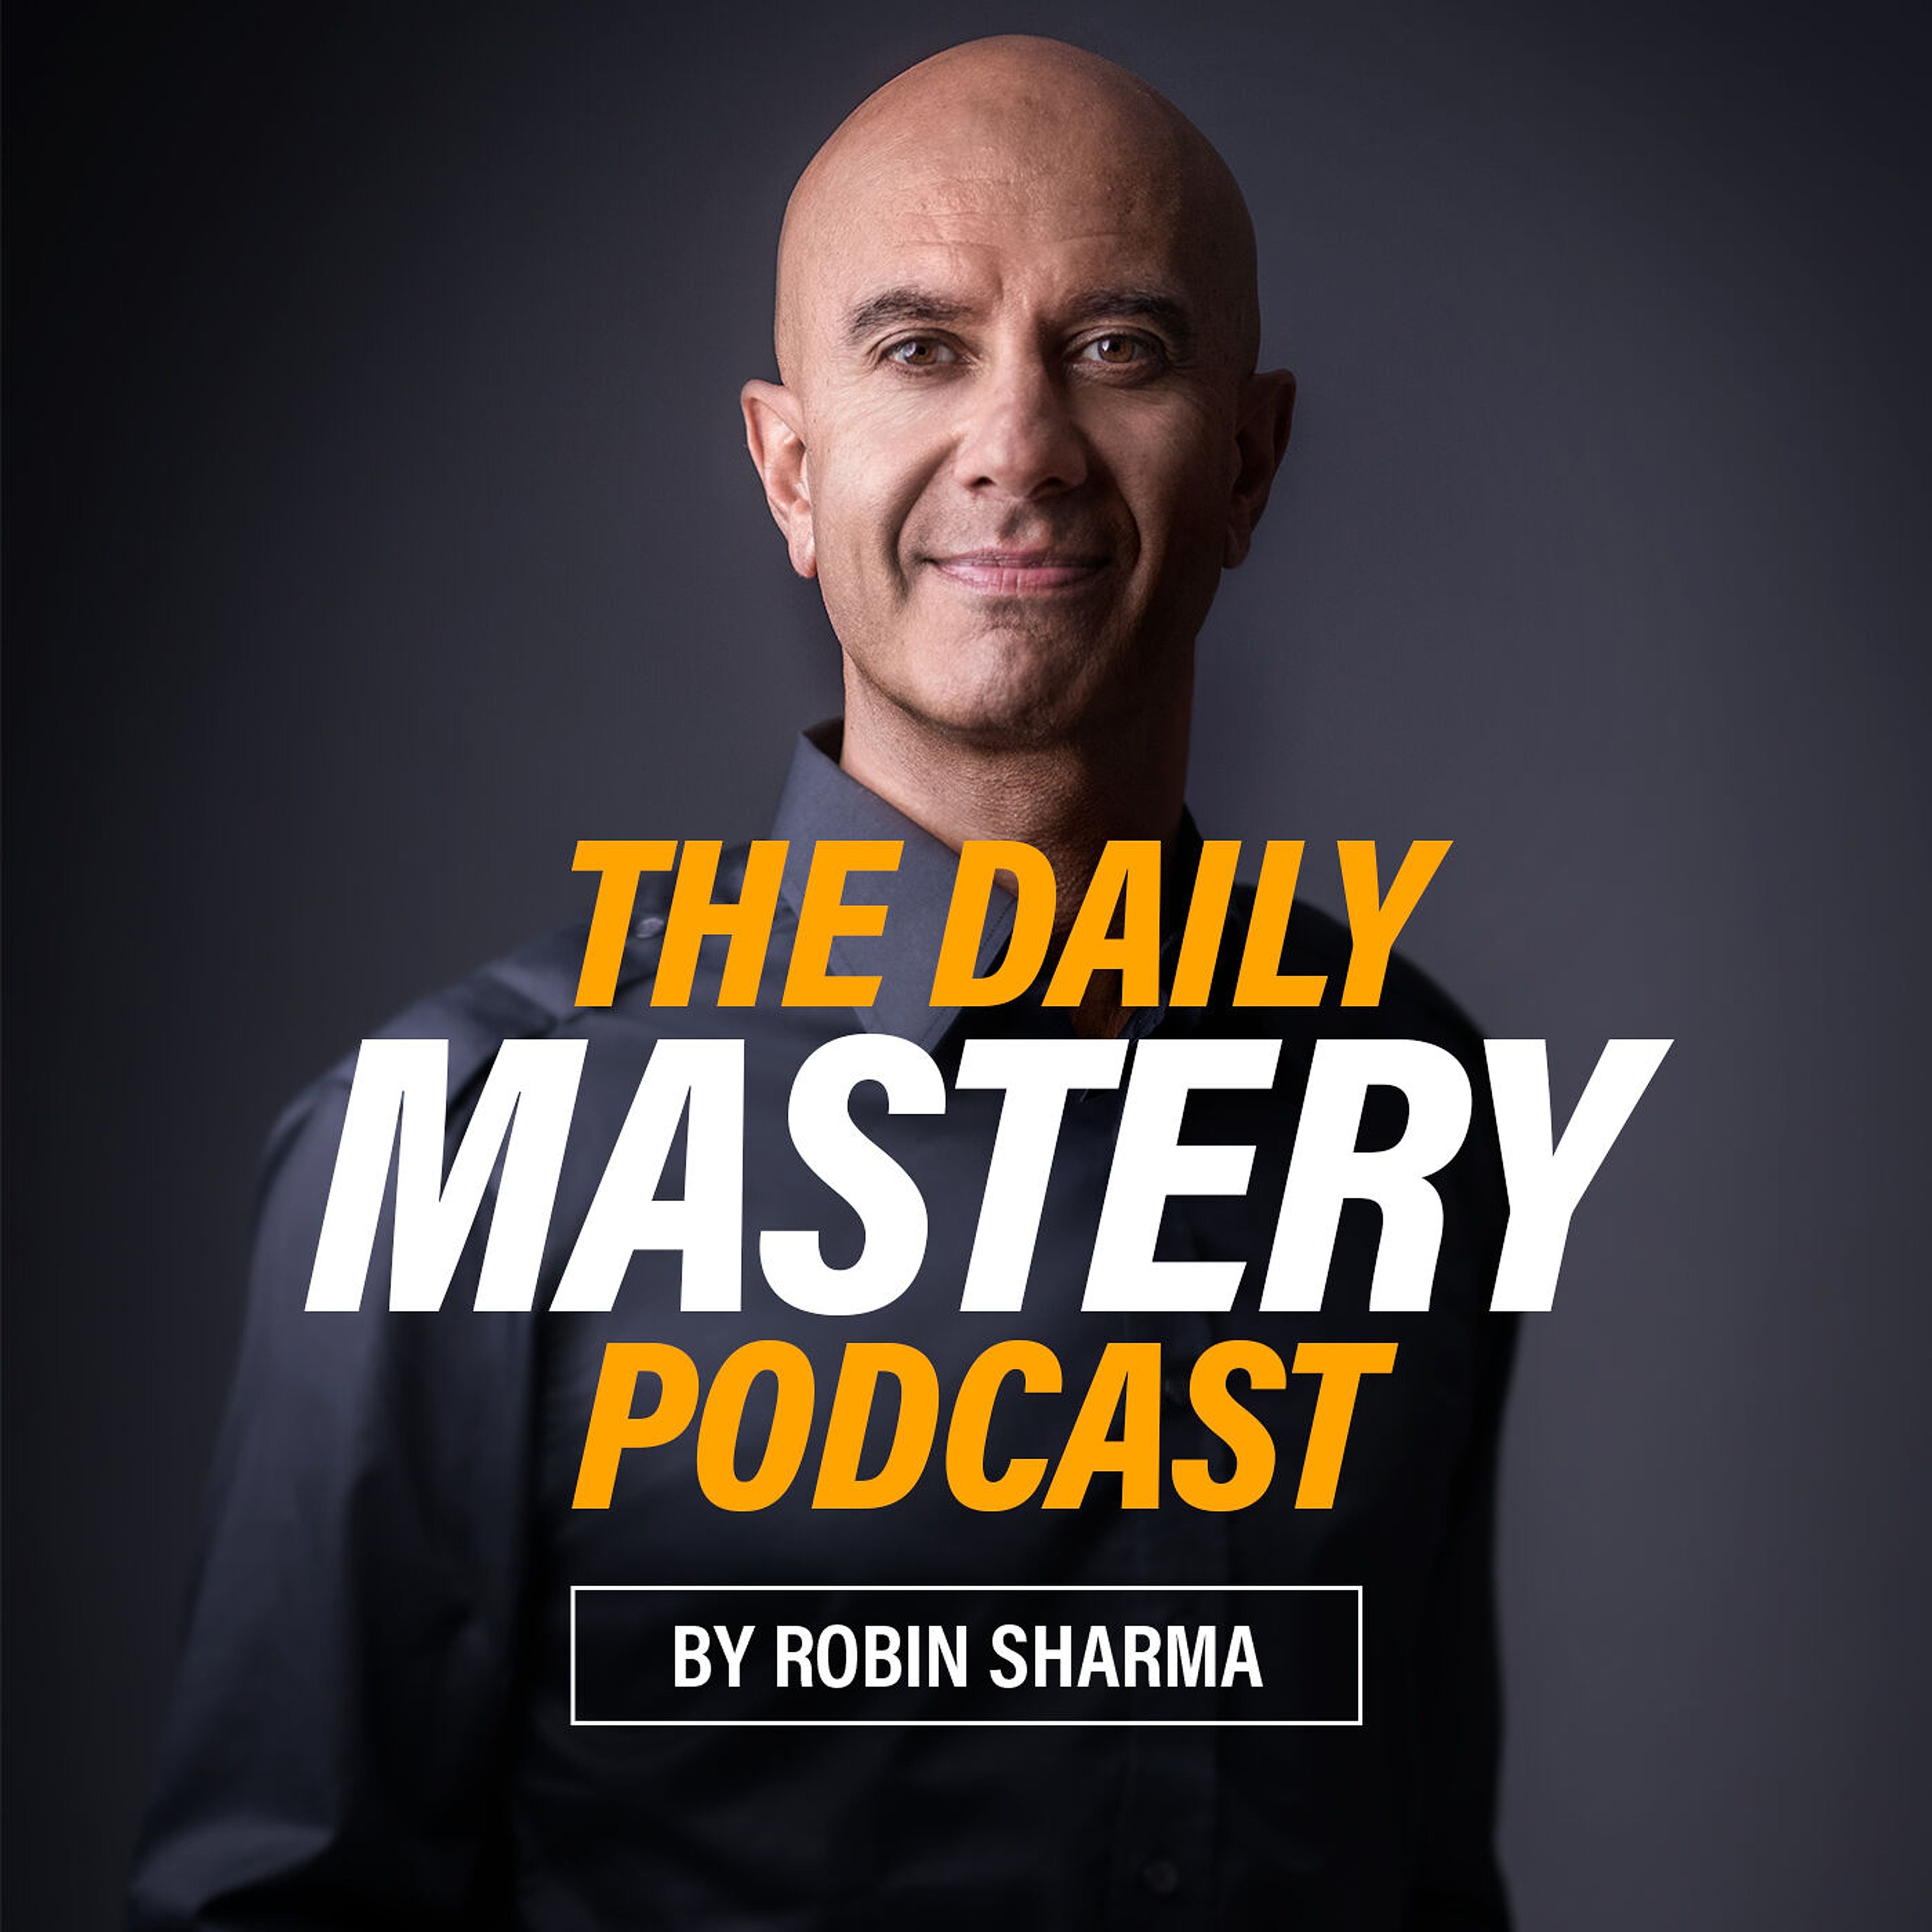 The Daily Mastery Podcast by Robin Sharma cover image